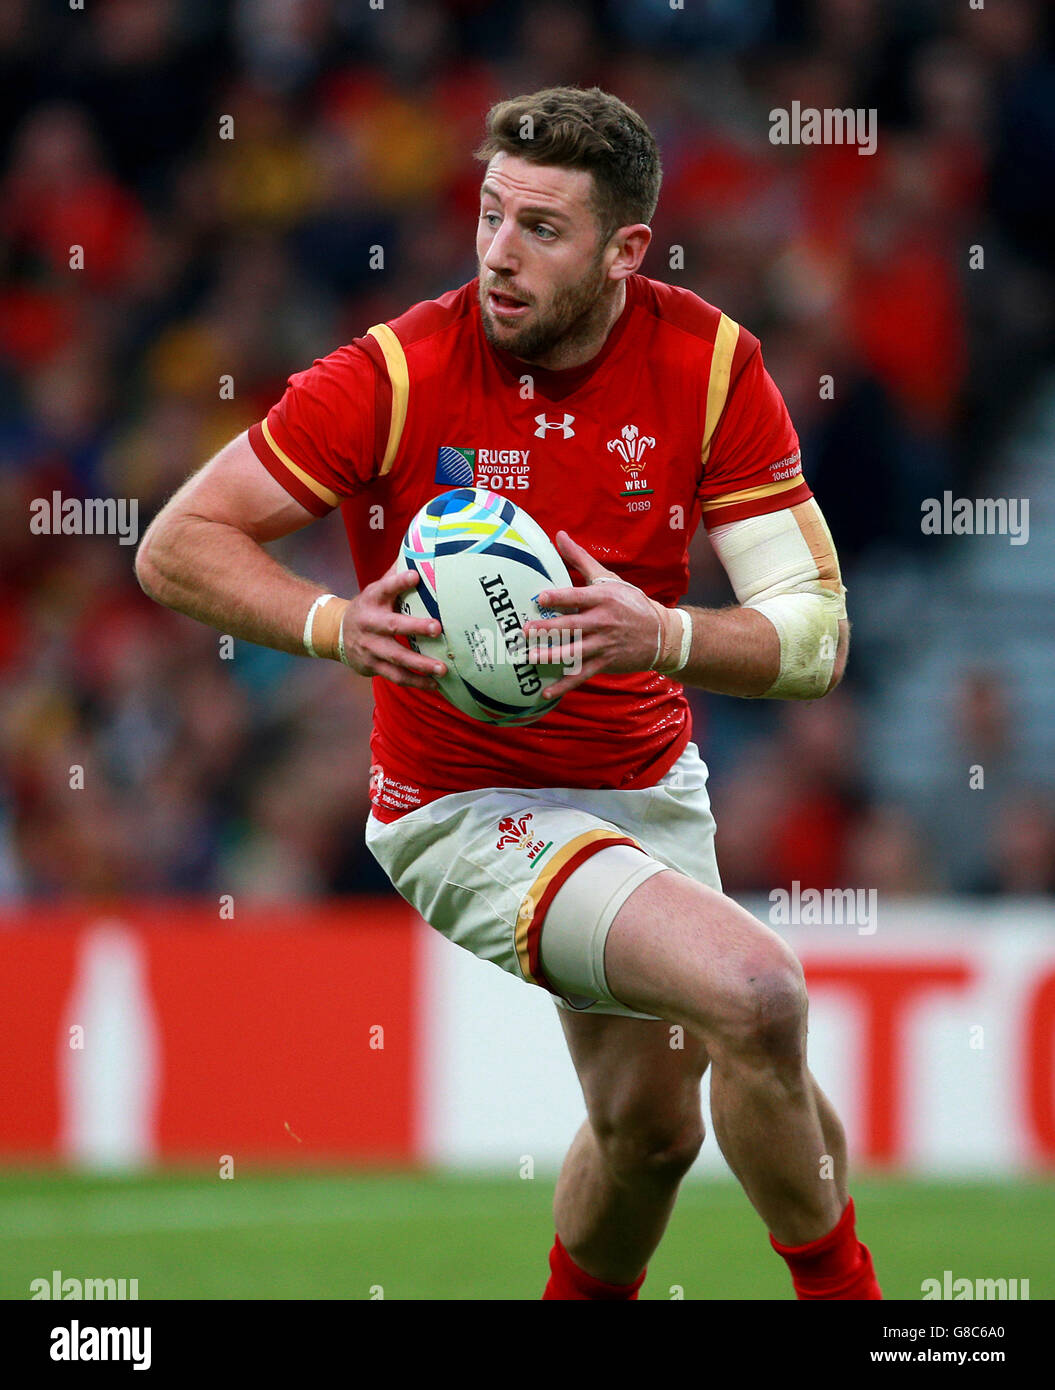 Rugby Union - Rugby World Cup 2015 - Pool A - Australia v Wales - Twickenham Stadium. Wales' Alex Cuthbert Stock Photo